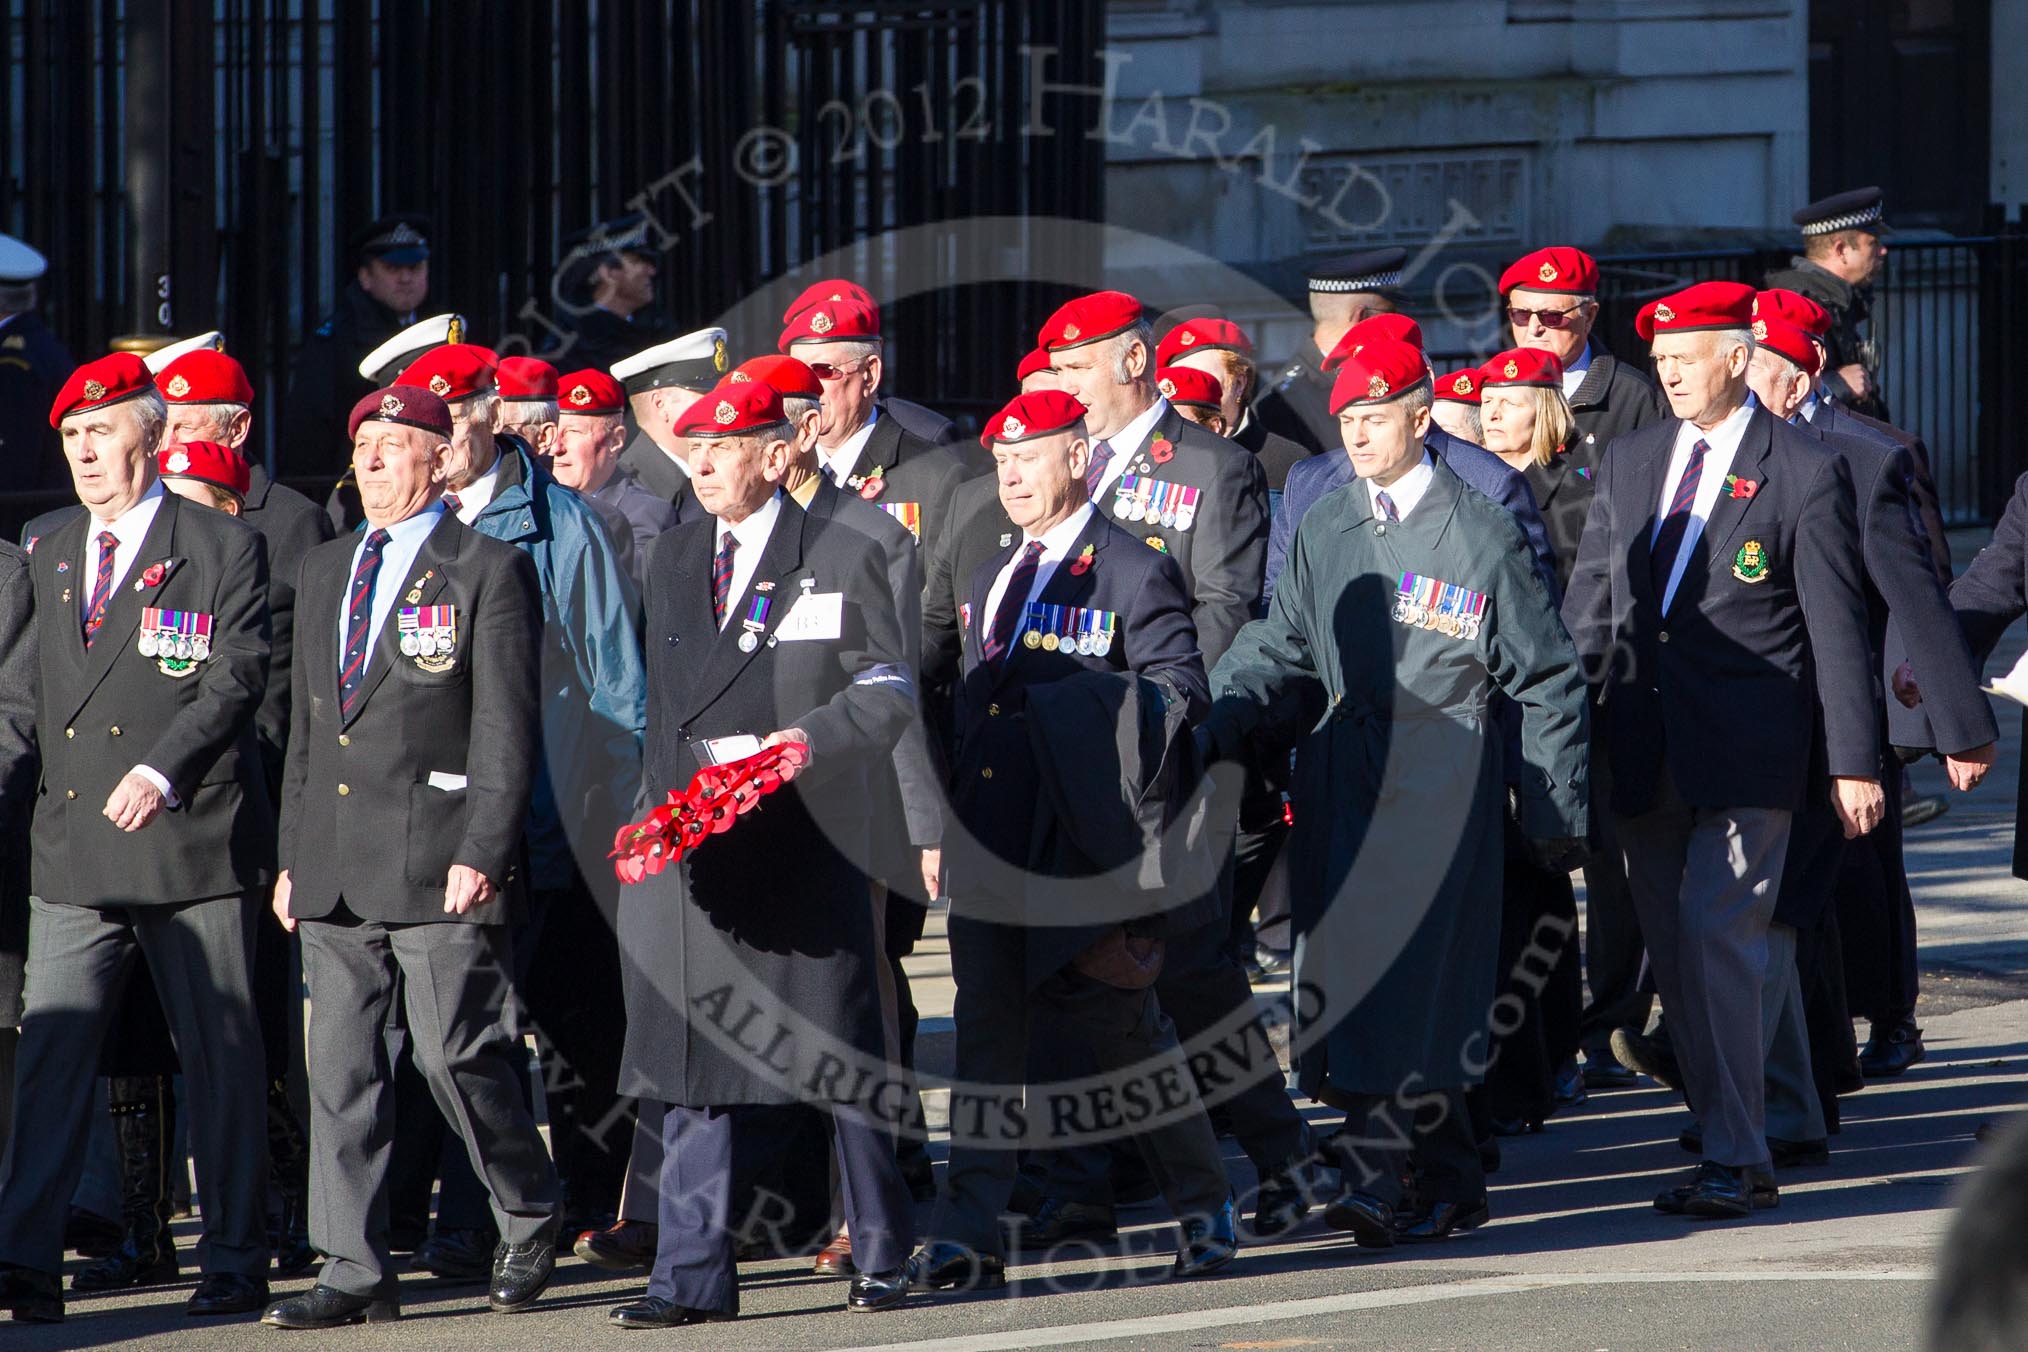 Remembrance Sunday 2012 Cenotaph March Past: Group B3, Royal Military Police Association..
Whitehall, Cenotaph,
London SW1,

United Kingdom,
on 11 November 2012 at 11:55, image #821